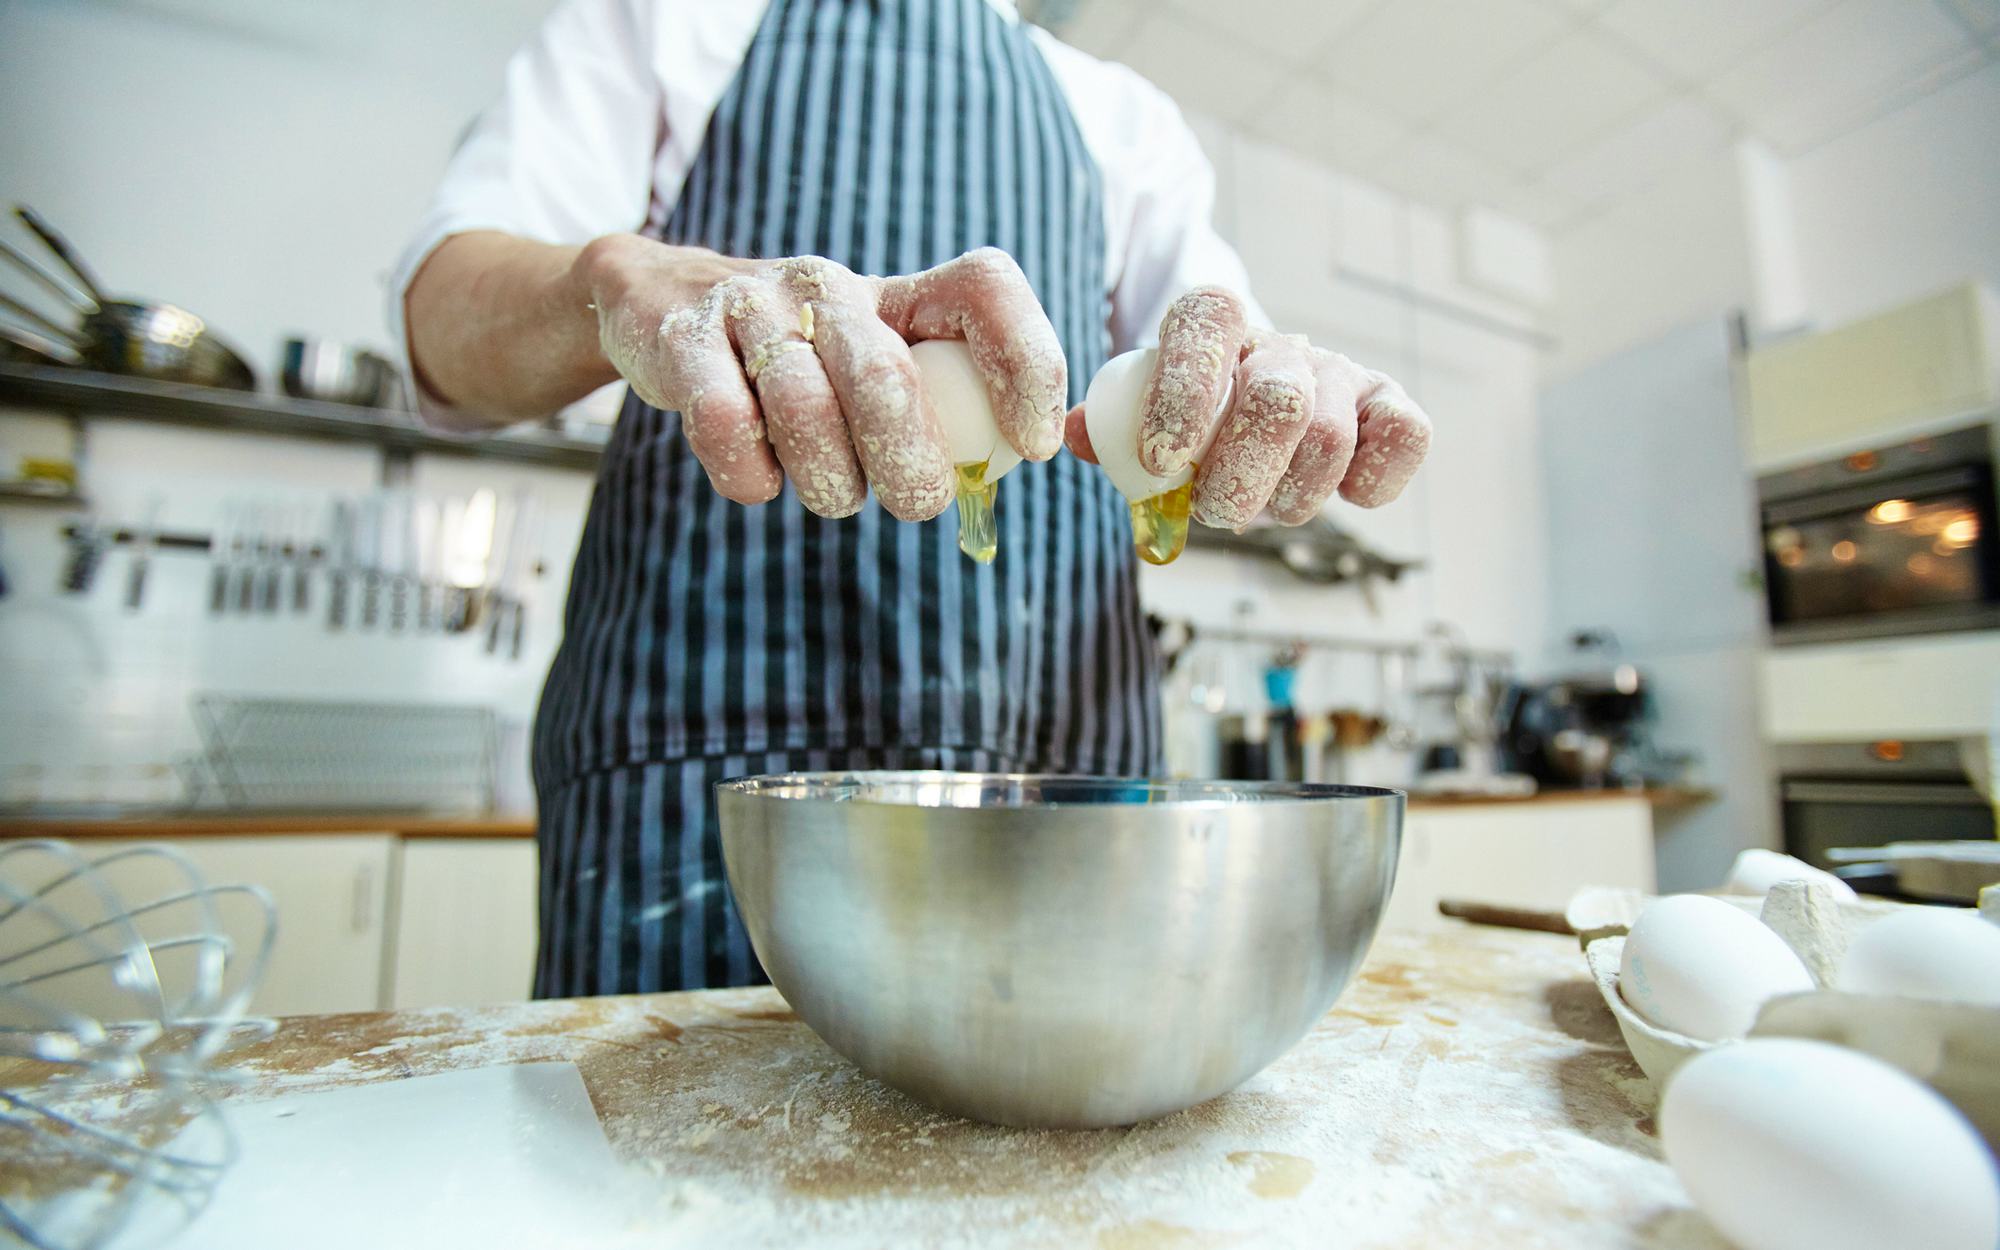 Teambuilding activities that work best for corporate groups cookery